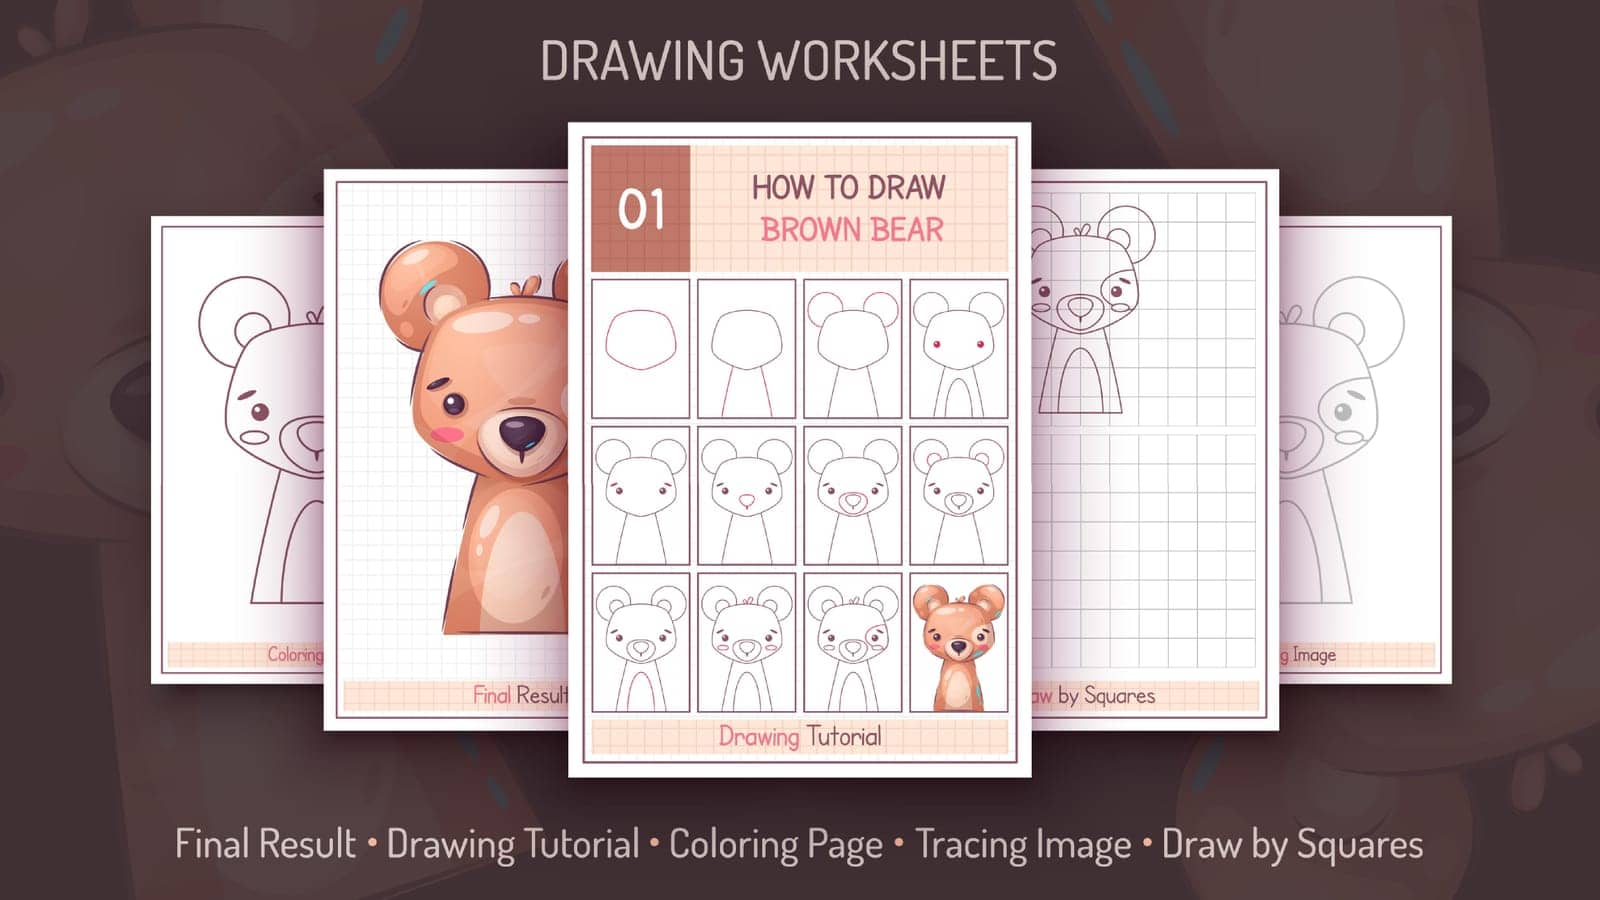 How to Draw a Brown Bear. Step by Step Drawing Tutorial. Draw Guide. Simple Instruction. Coloring Page. Worksheets for Kids and Adults. Vector eps 10.